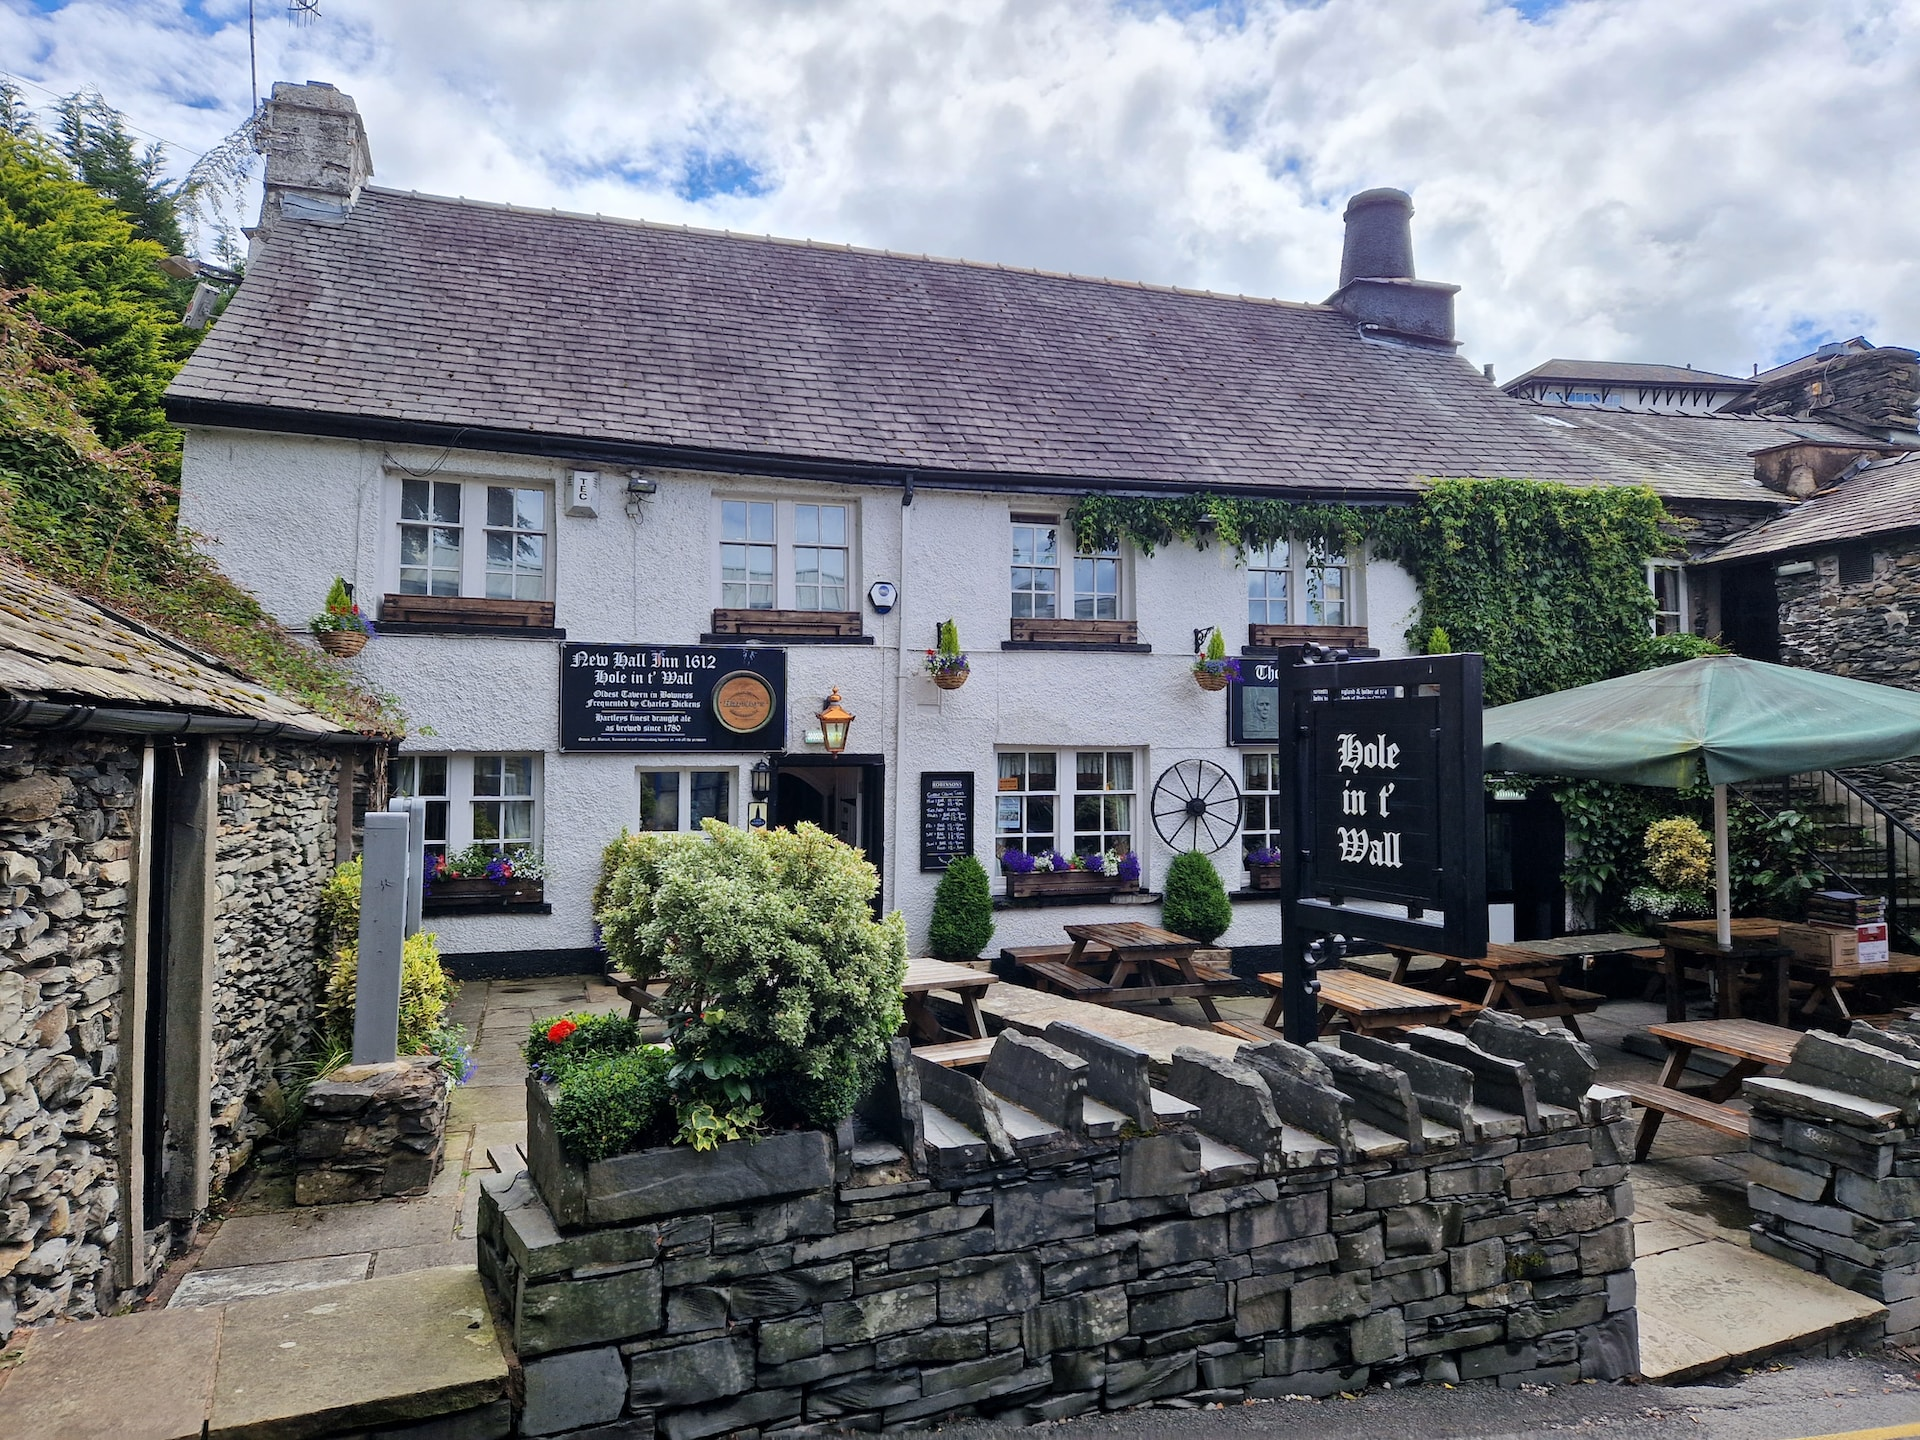 Photograph of a traditional British country pub with outdoor seating